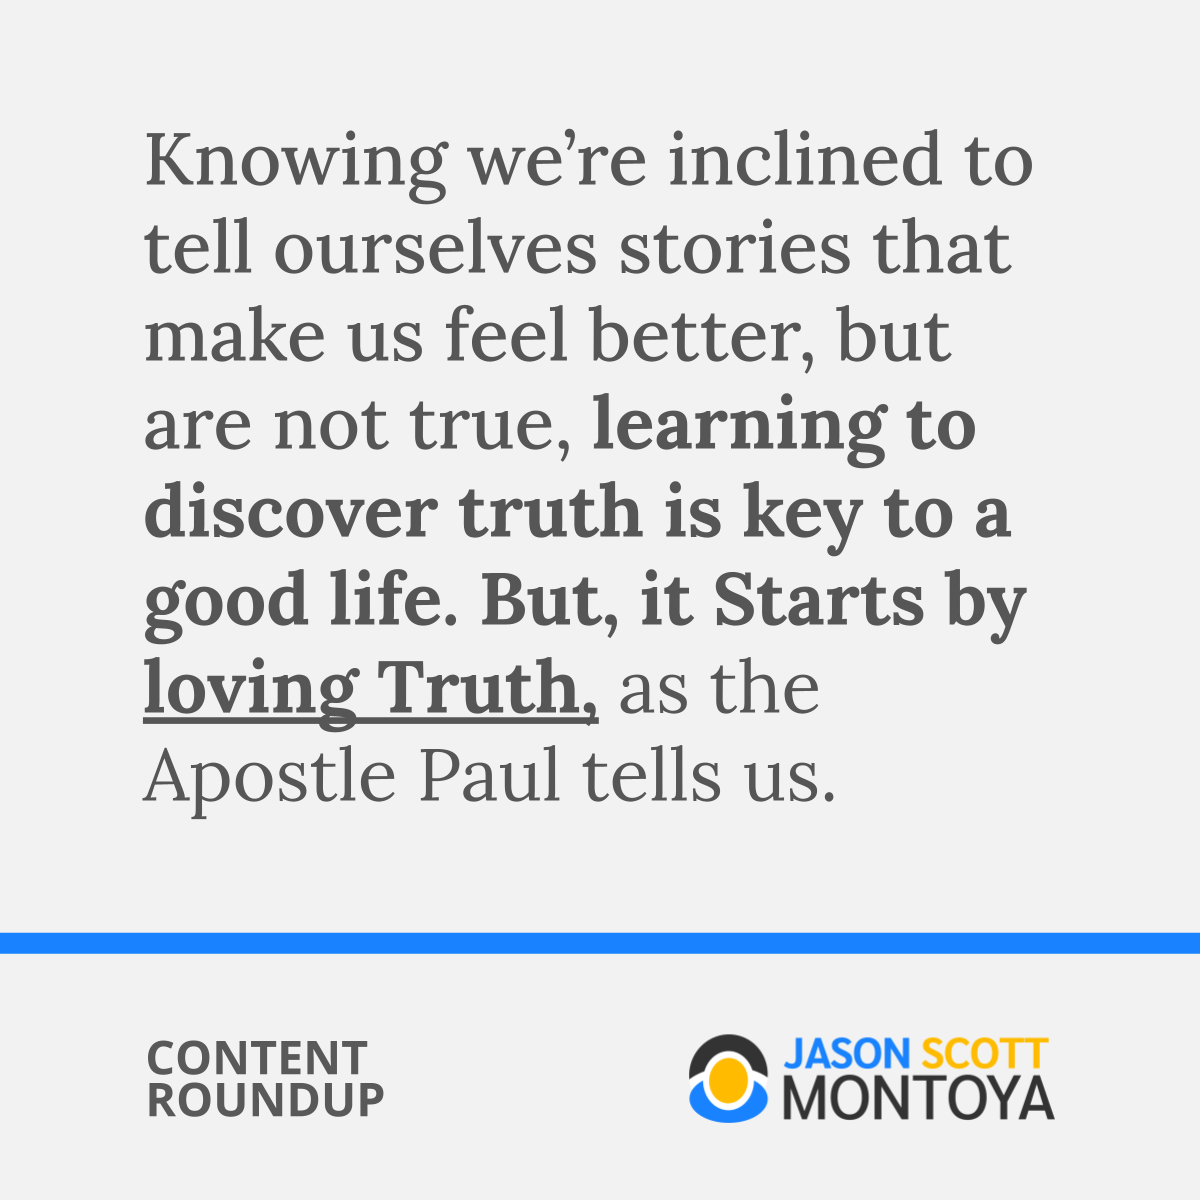 Knowing we’re inclined to tell ourselves stories that make us feel better, but are not true, learning to discover truth is key to a good life. But, it Starts by loving Truth, as the Apostle Paul tells us. 